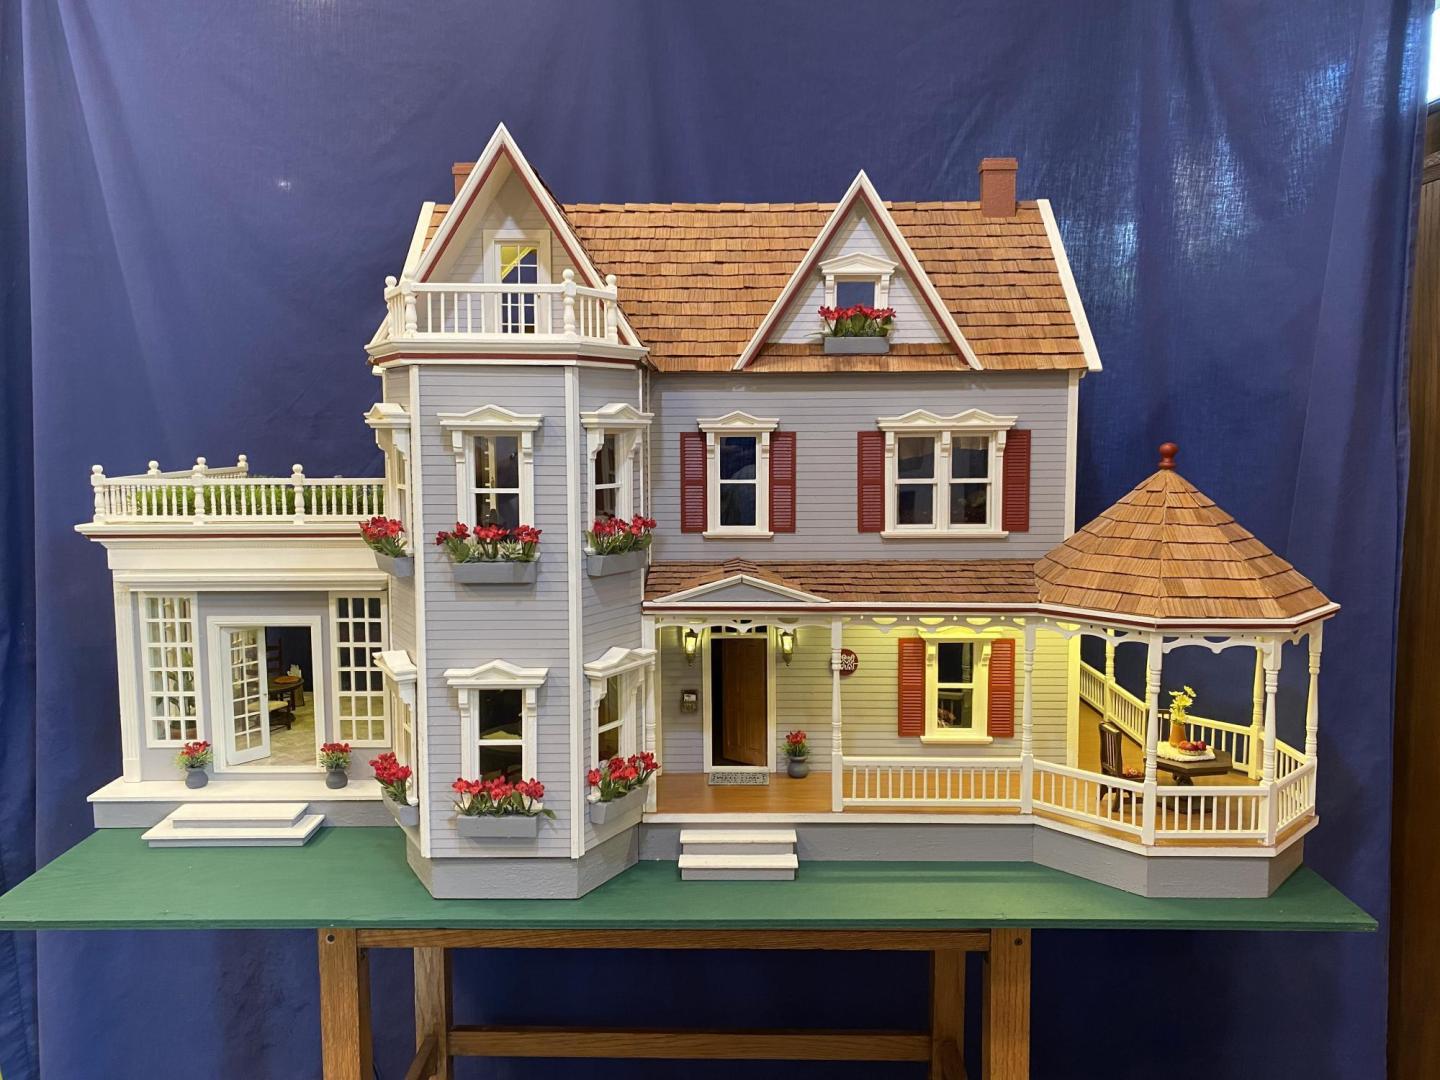 Norm and Sharon Ewert completely renovate and customize each of the wooden dollhouses.